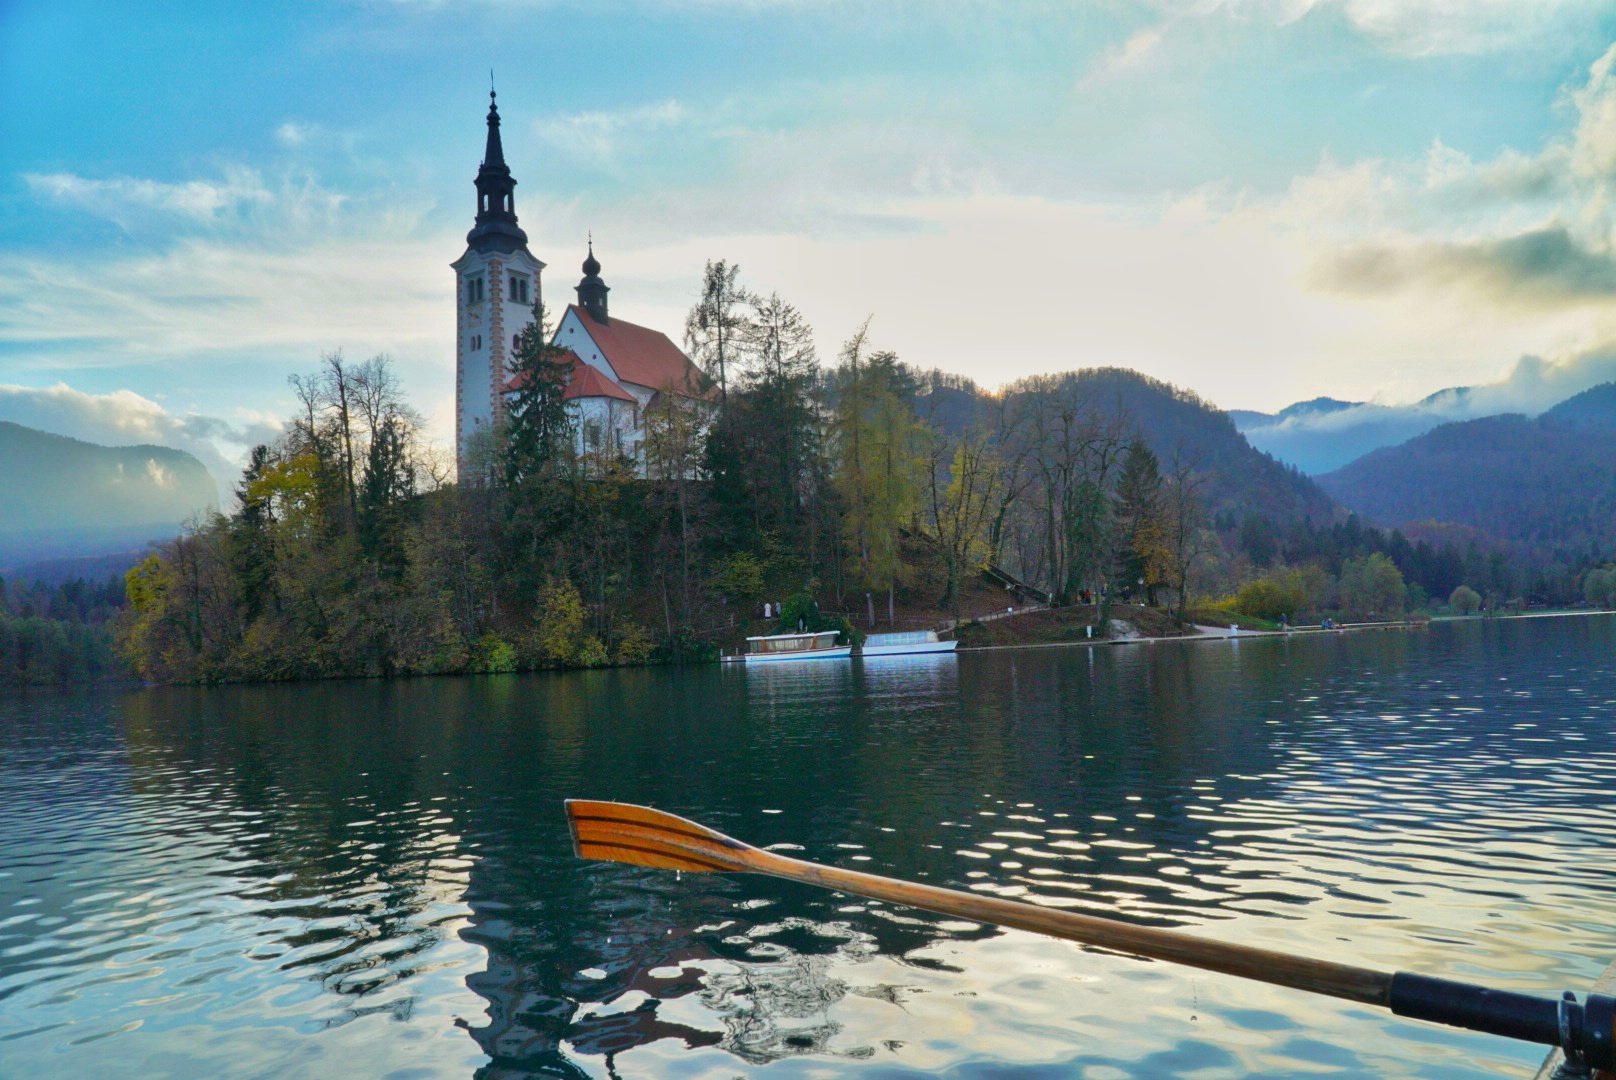 A Visit to Lake Bled